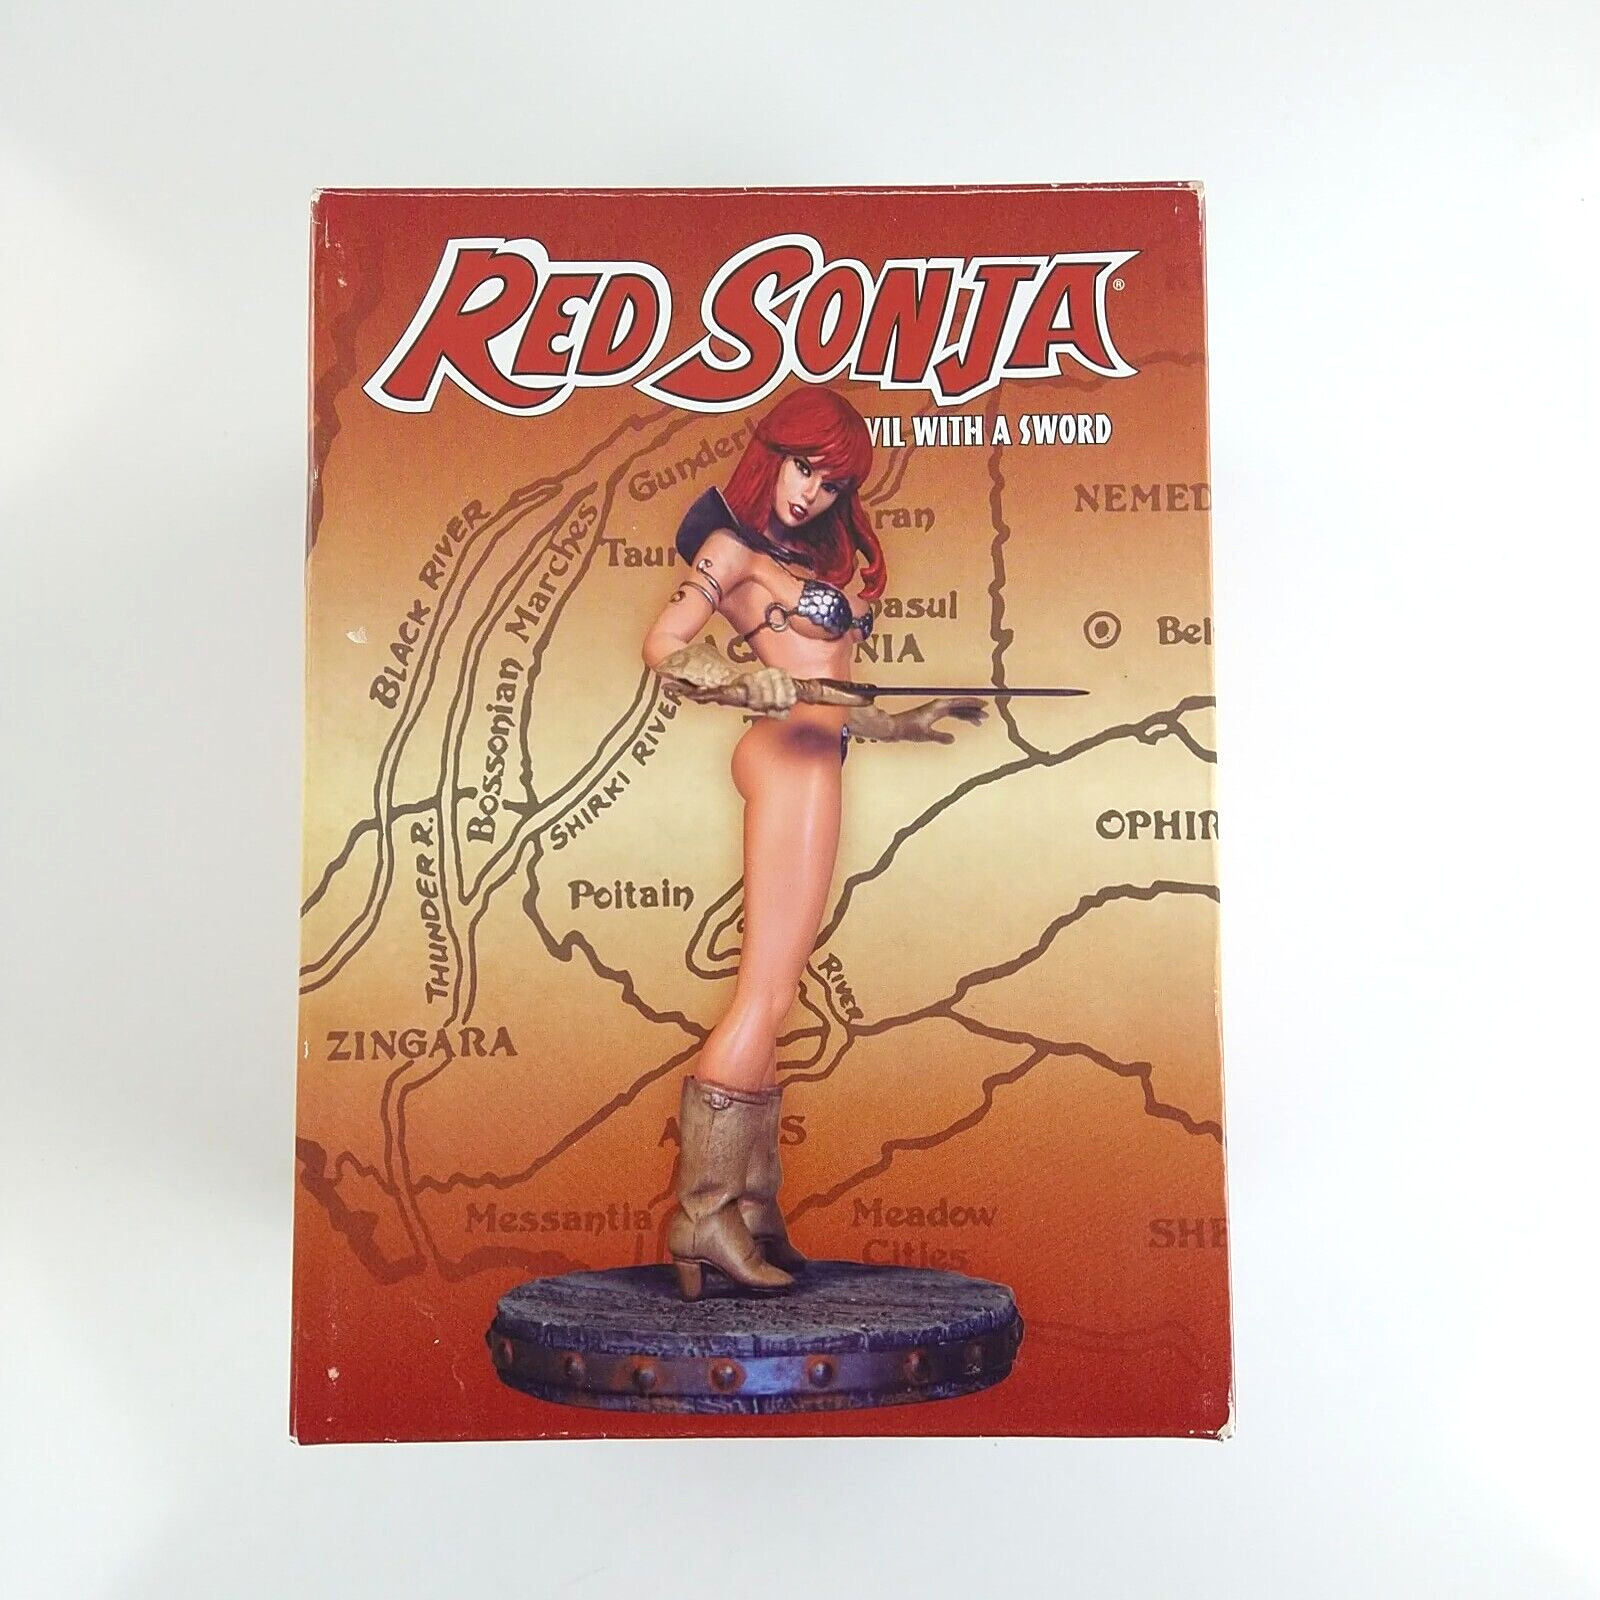 Dynamite Linsner RED SONJA She-Devil with a Sword Statue Figure New in Box